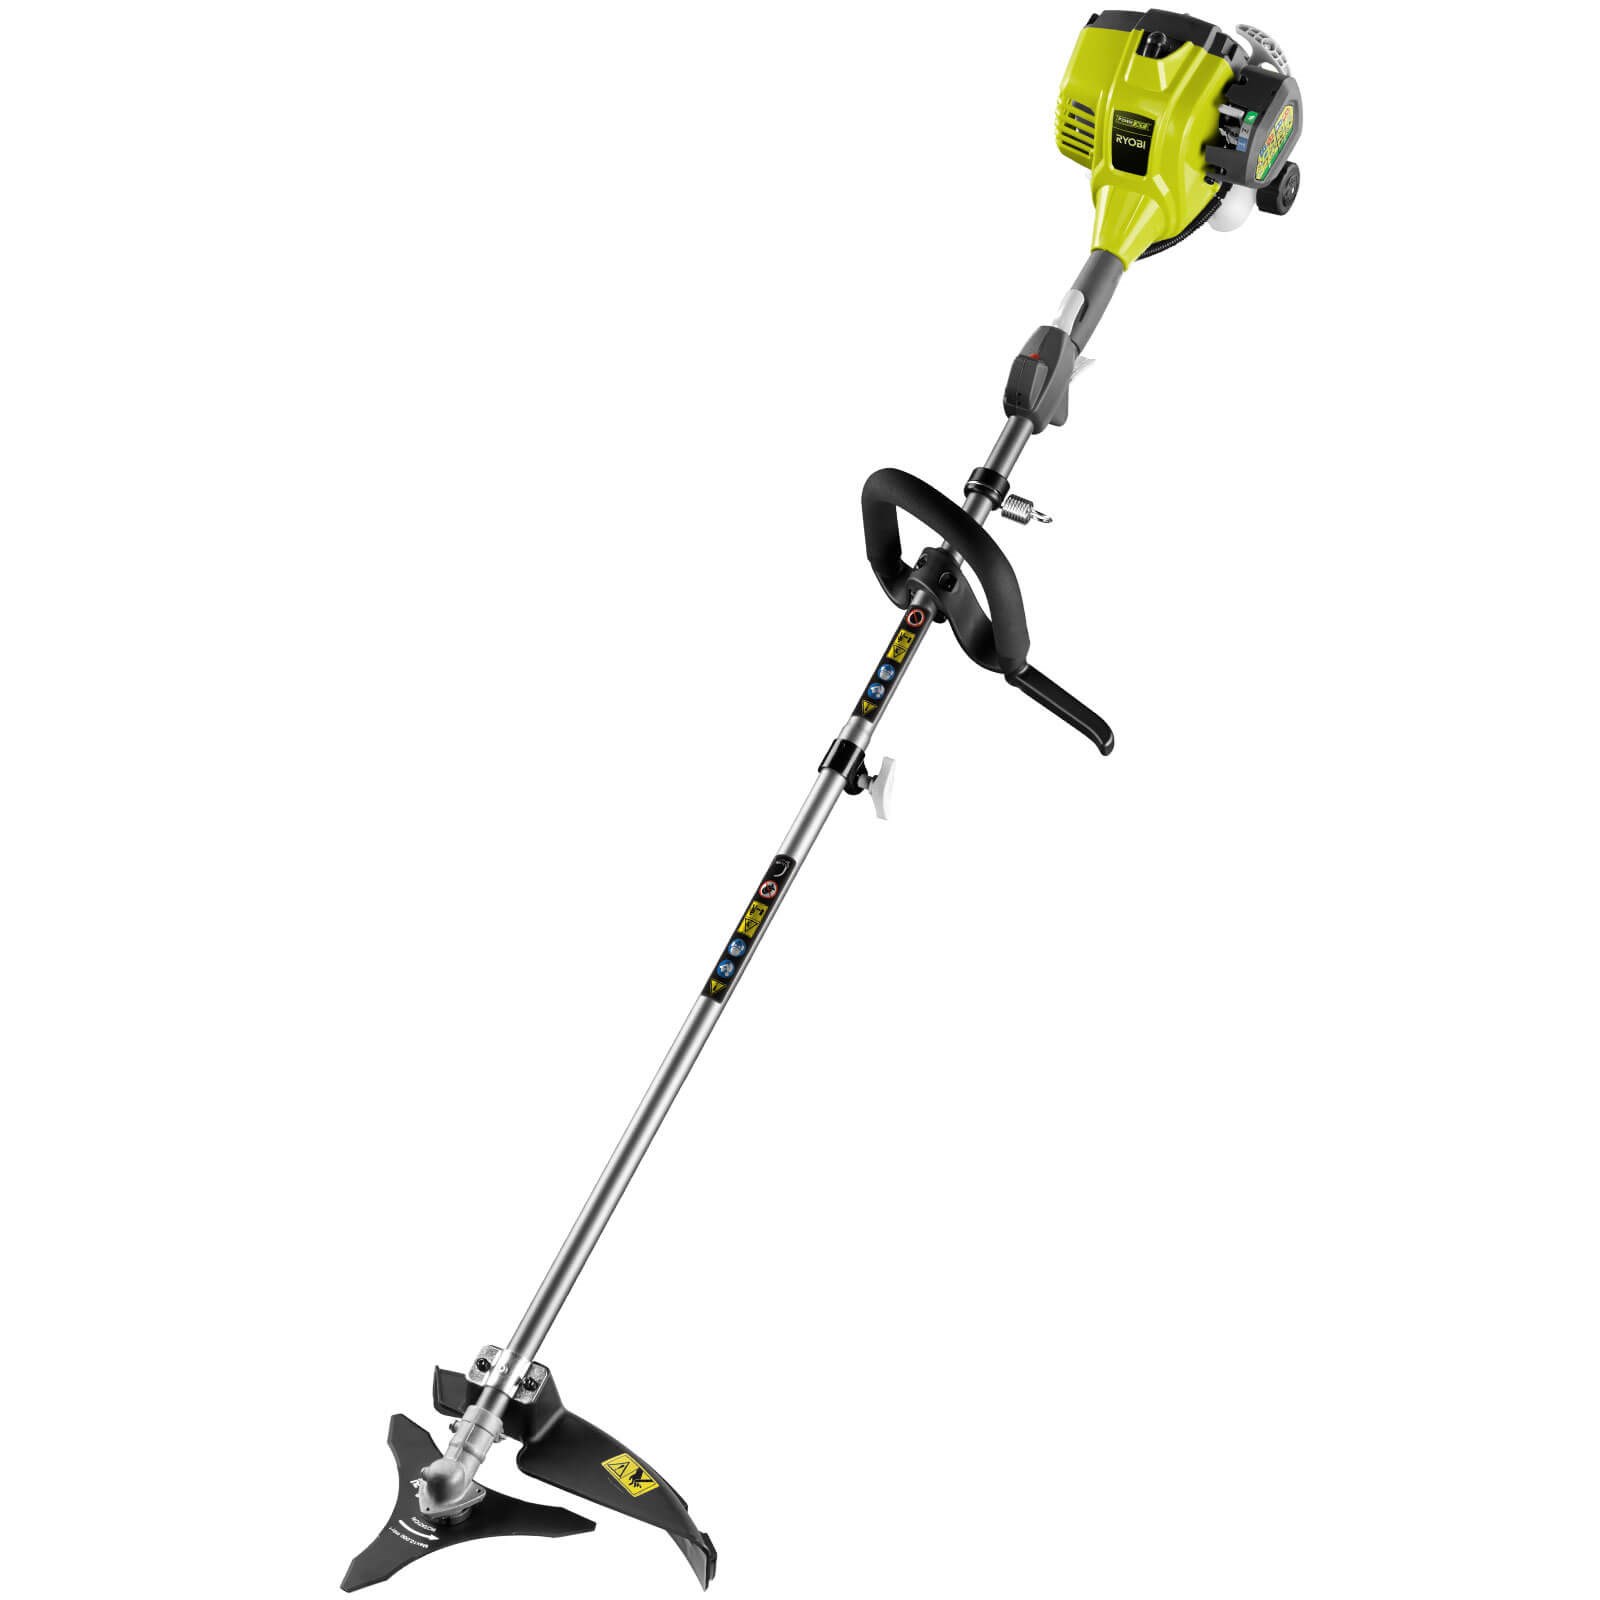 RBC254SESO Petrol Expand It 2 in 1 Grass Trimmer and Brush Cutter 460mm | Grass Trimmers